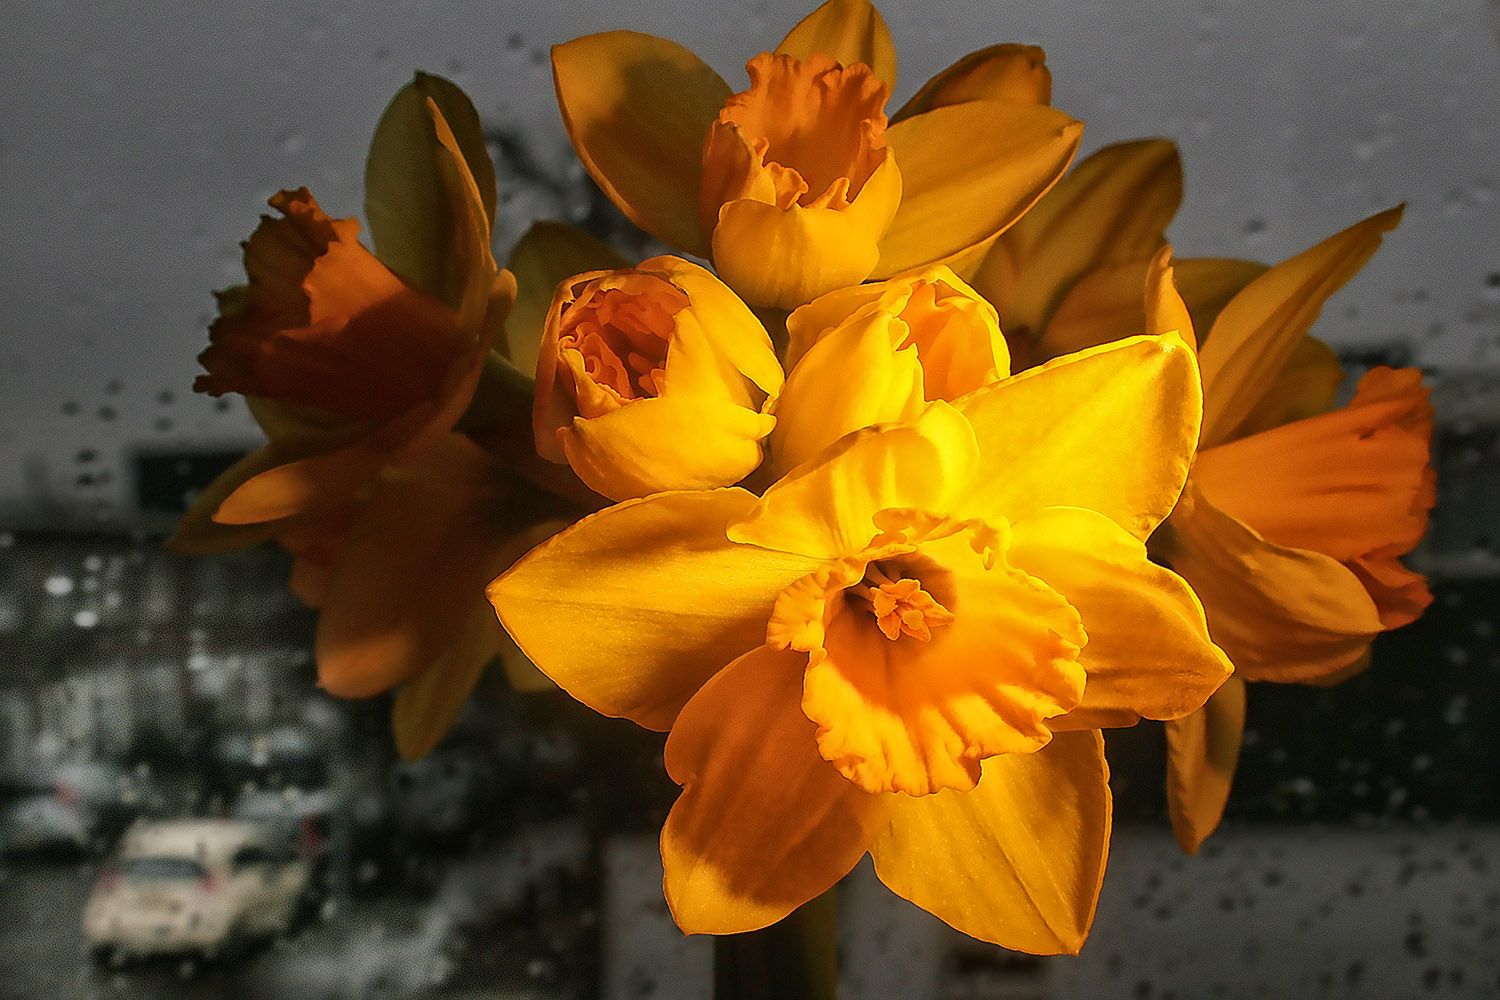 Daffodils in a vase in front of a window. - Macro